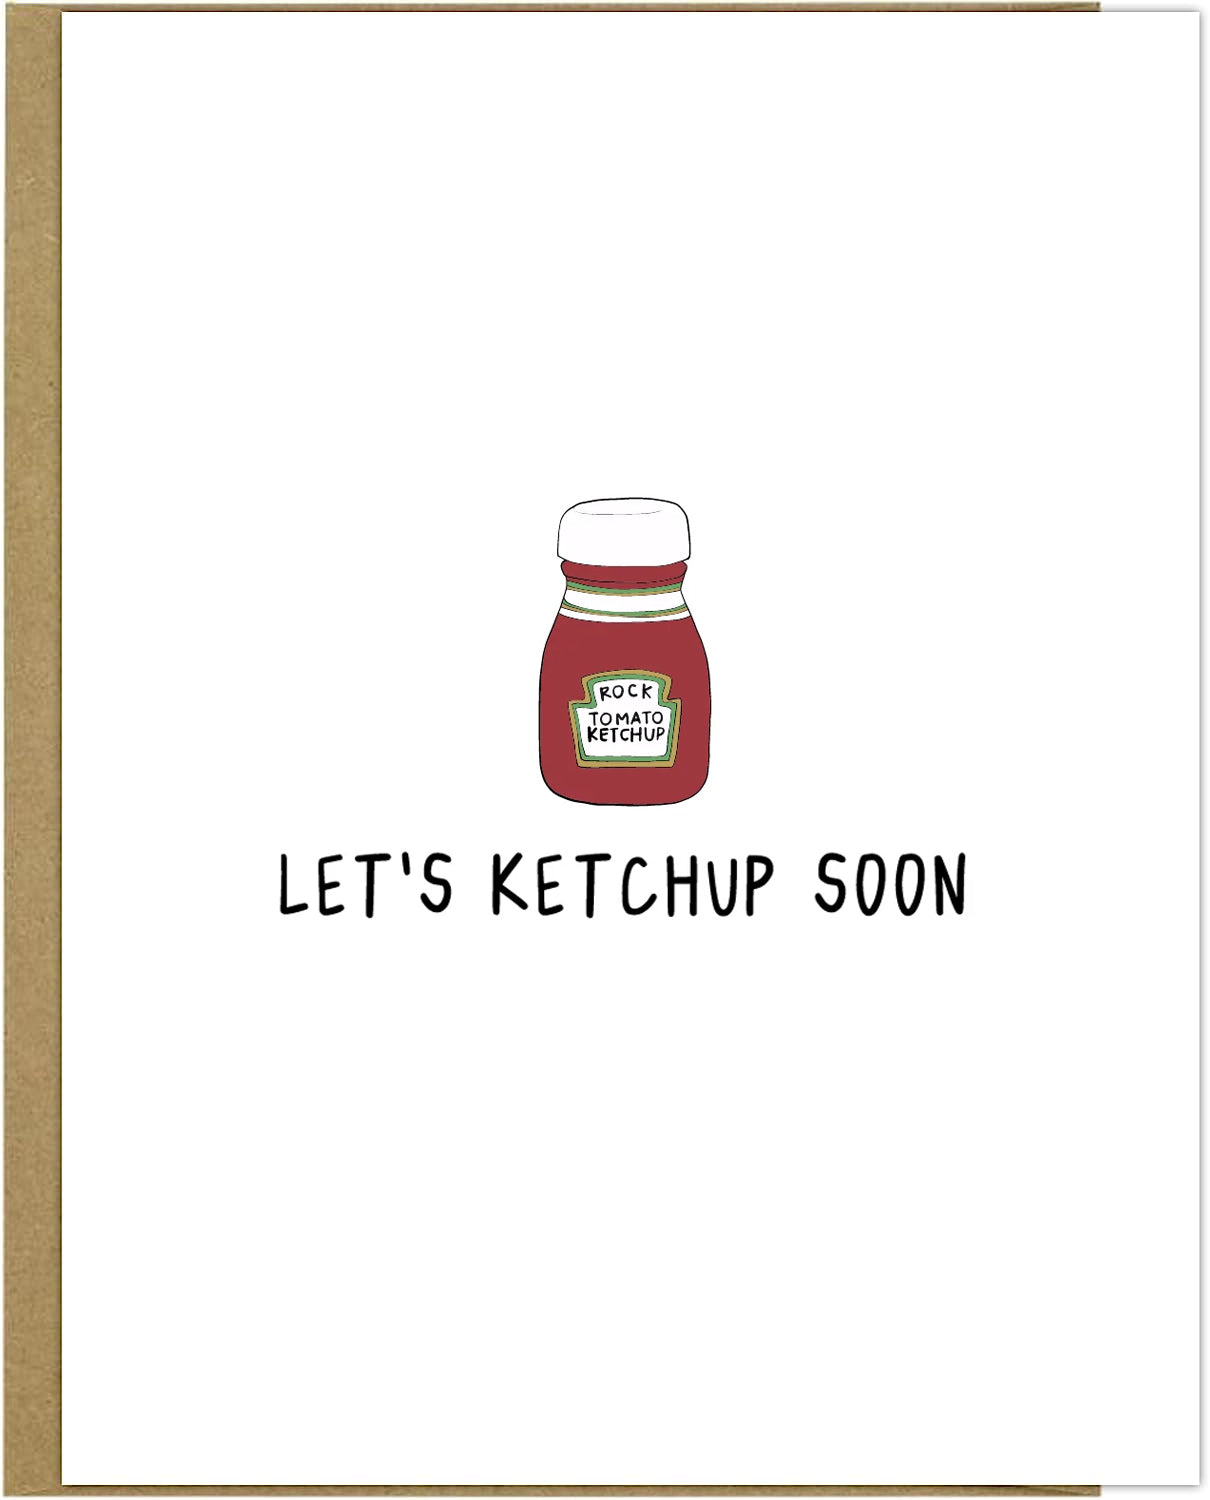 Send a Ketchup Card-themed greeting card to someone special, complete with a custom envelope from rockdoodles.